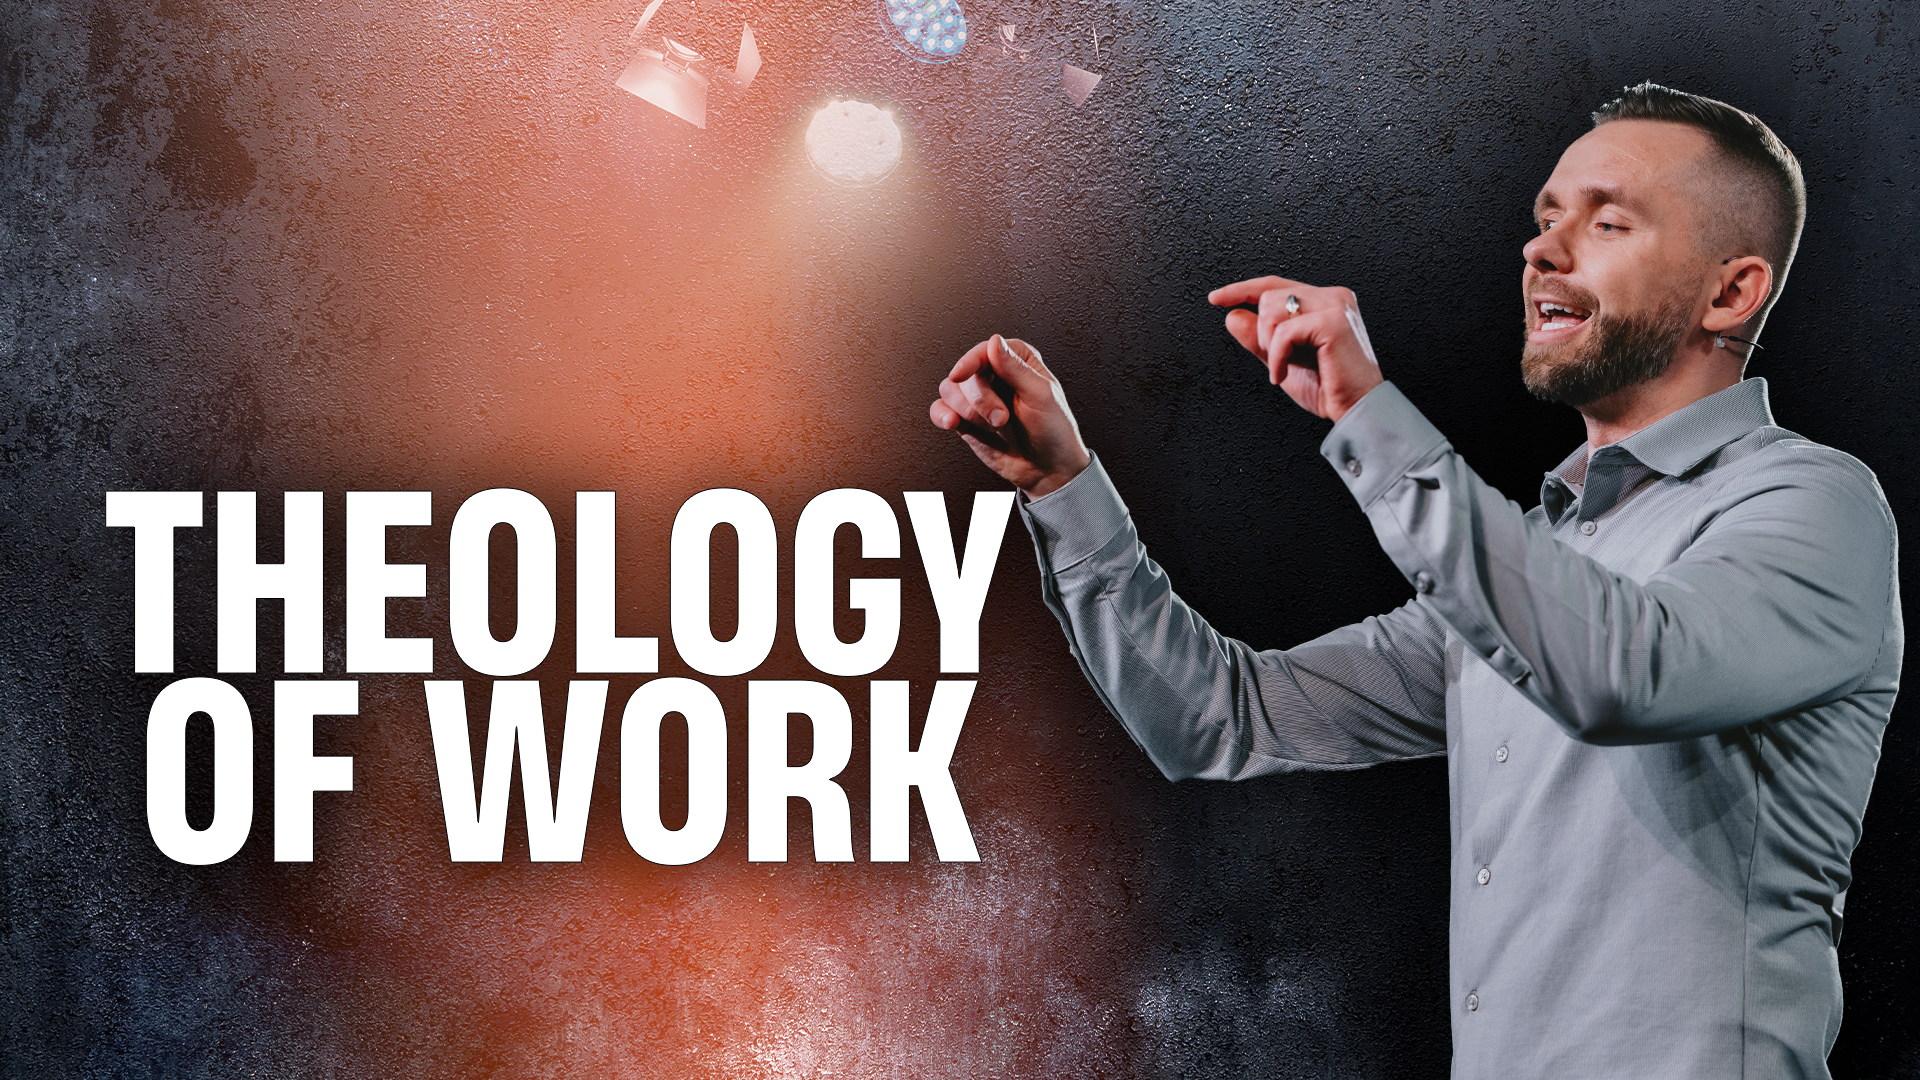 Featured image for 'The Theology of Work'